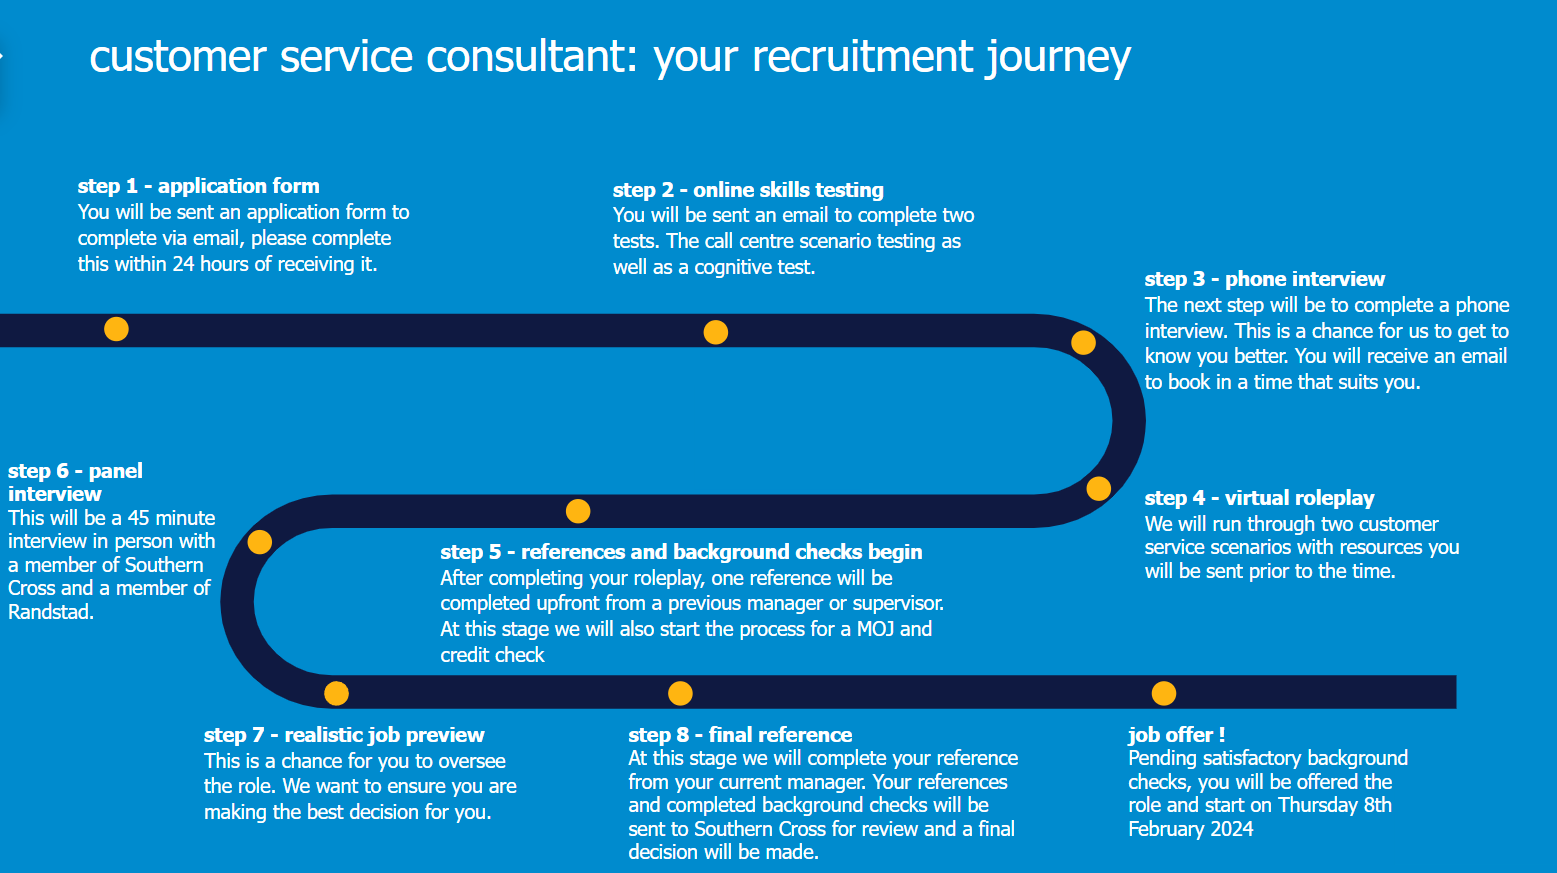 an infographic for the recruitment journey for customer service consultant